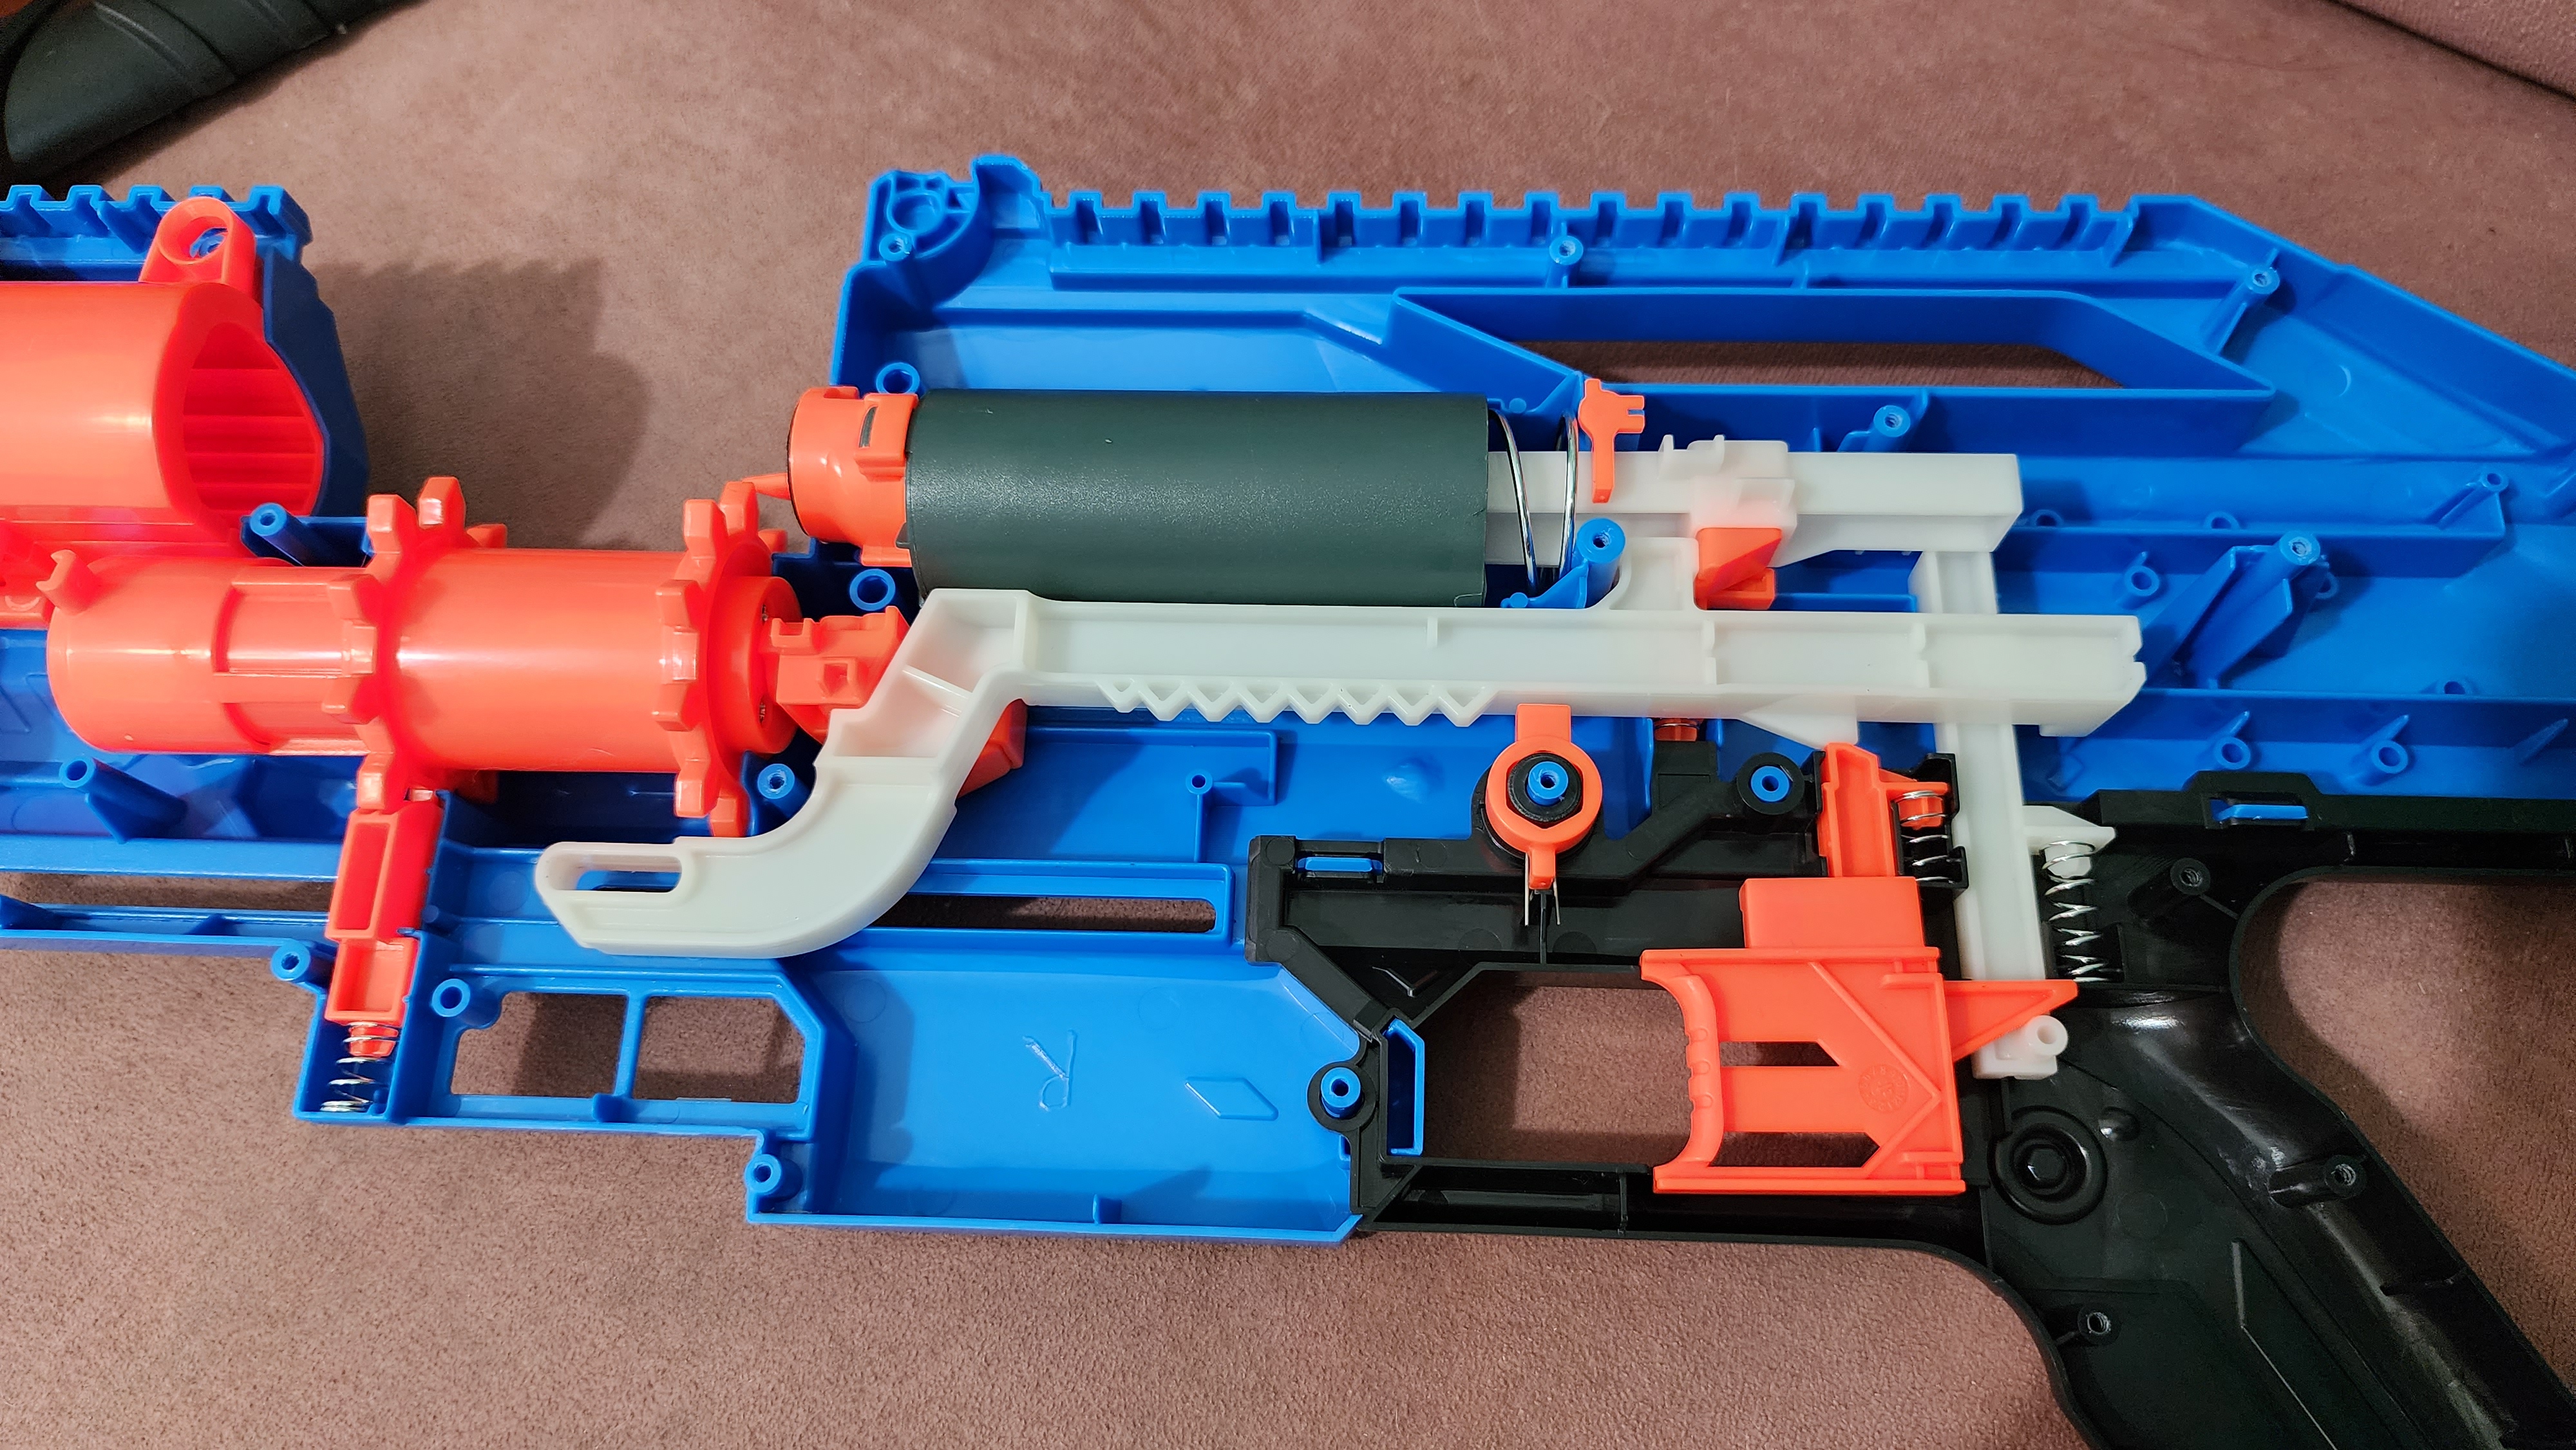 Xshot Mad Mega Barrel, Xshot Manic, Xshot berzerko. And a new Xshot line  that will make every foam flinger die of excitement (also an article  that gives more detail on the new